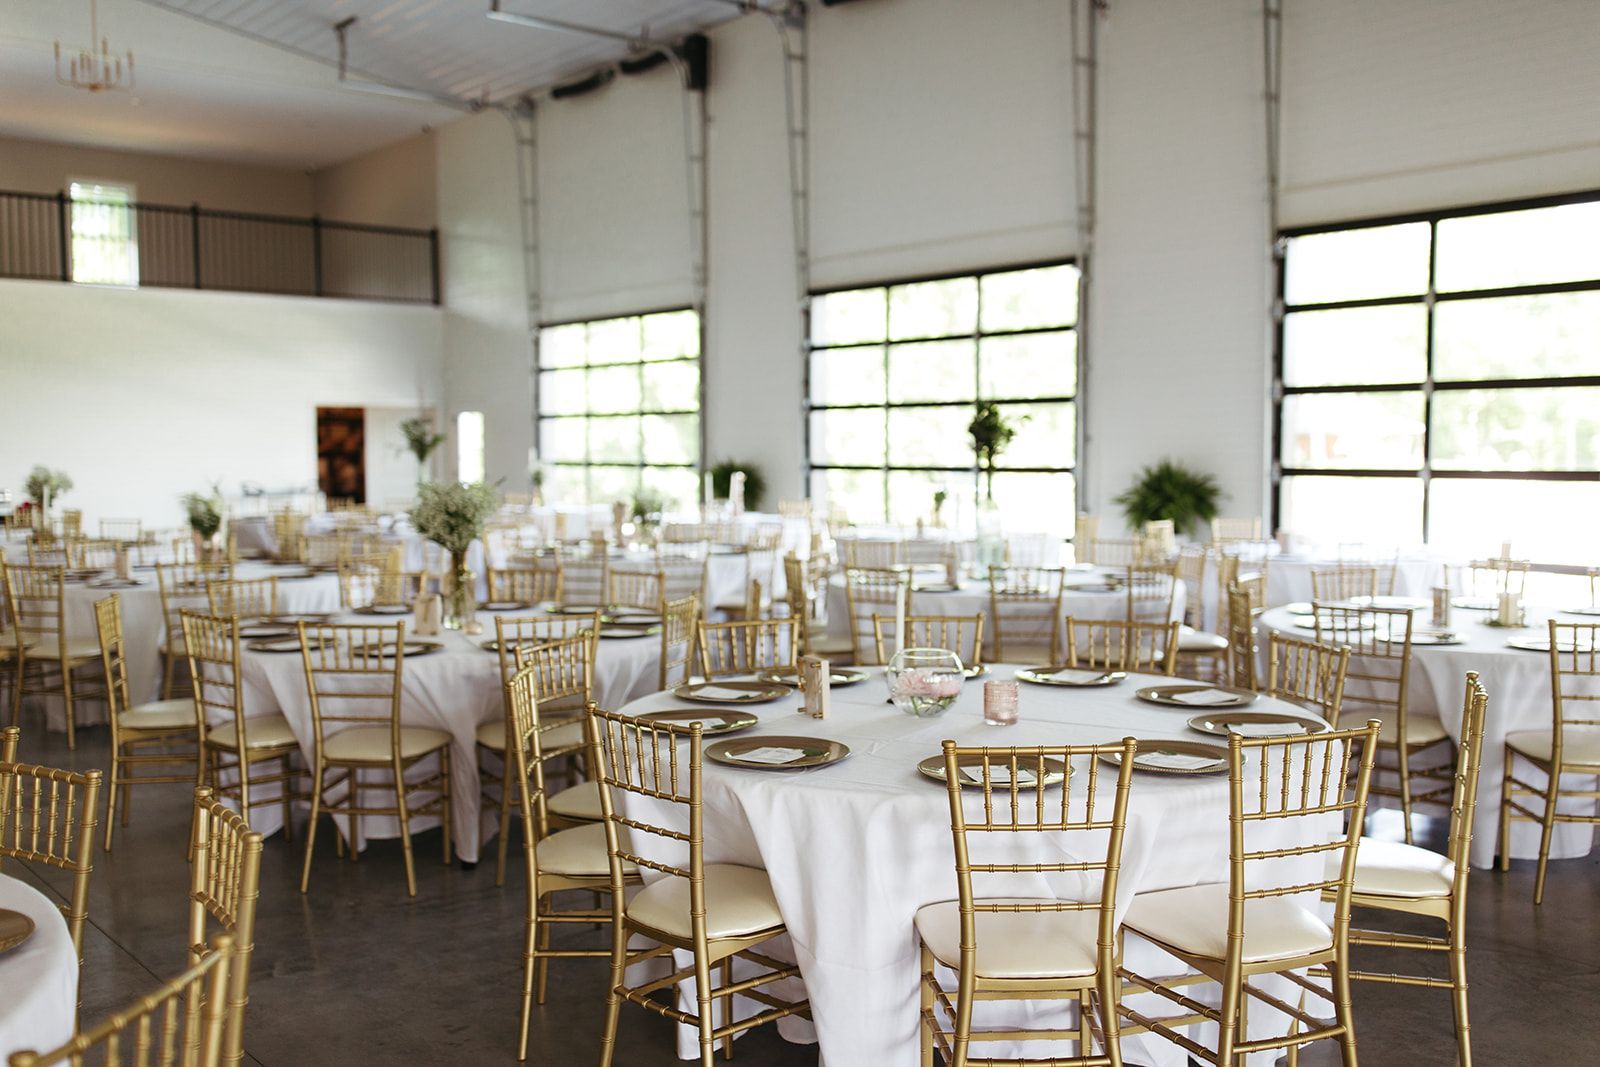 Host an Upscale & Glamorous Wedding at the Champagne Barn in Mid-Missouri. Book Your Visit Today.